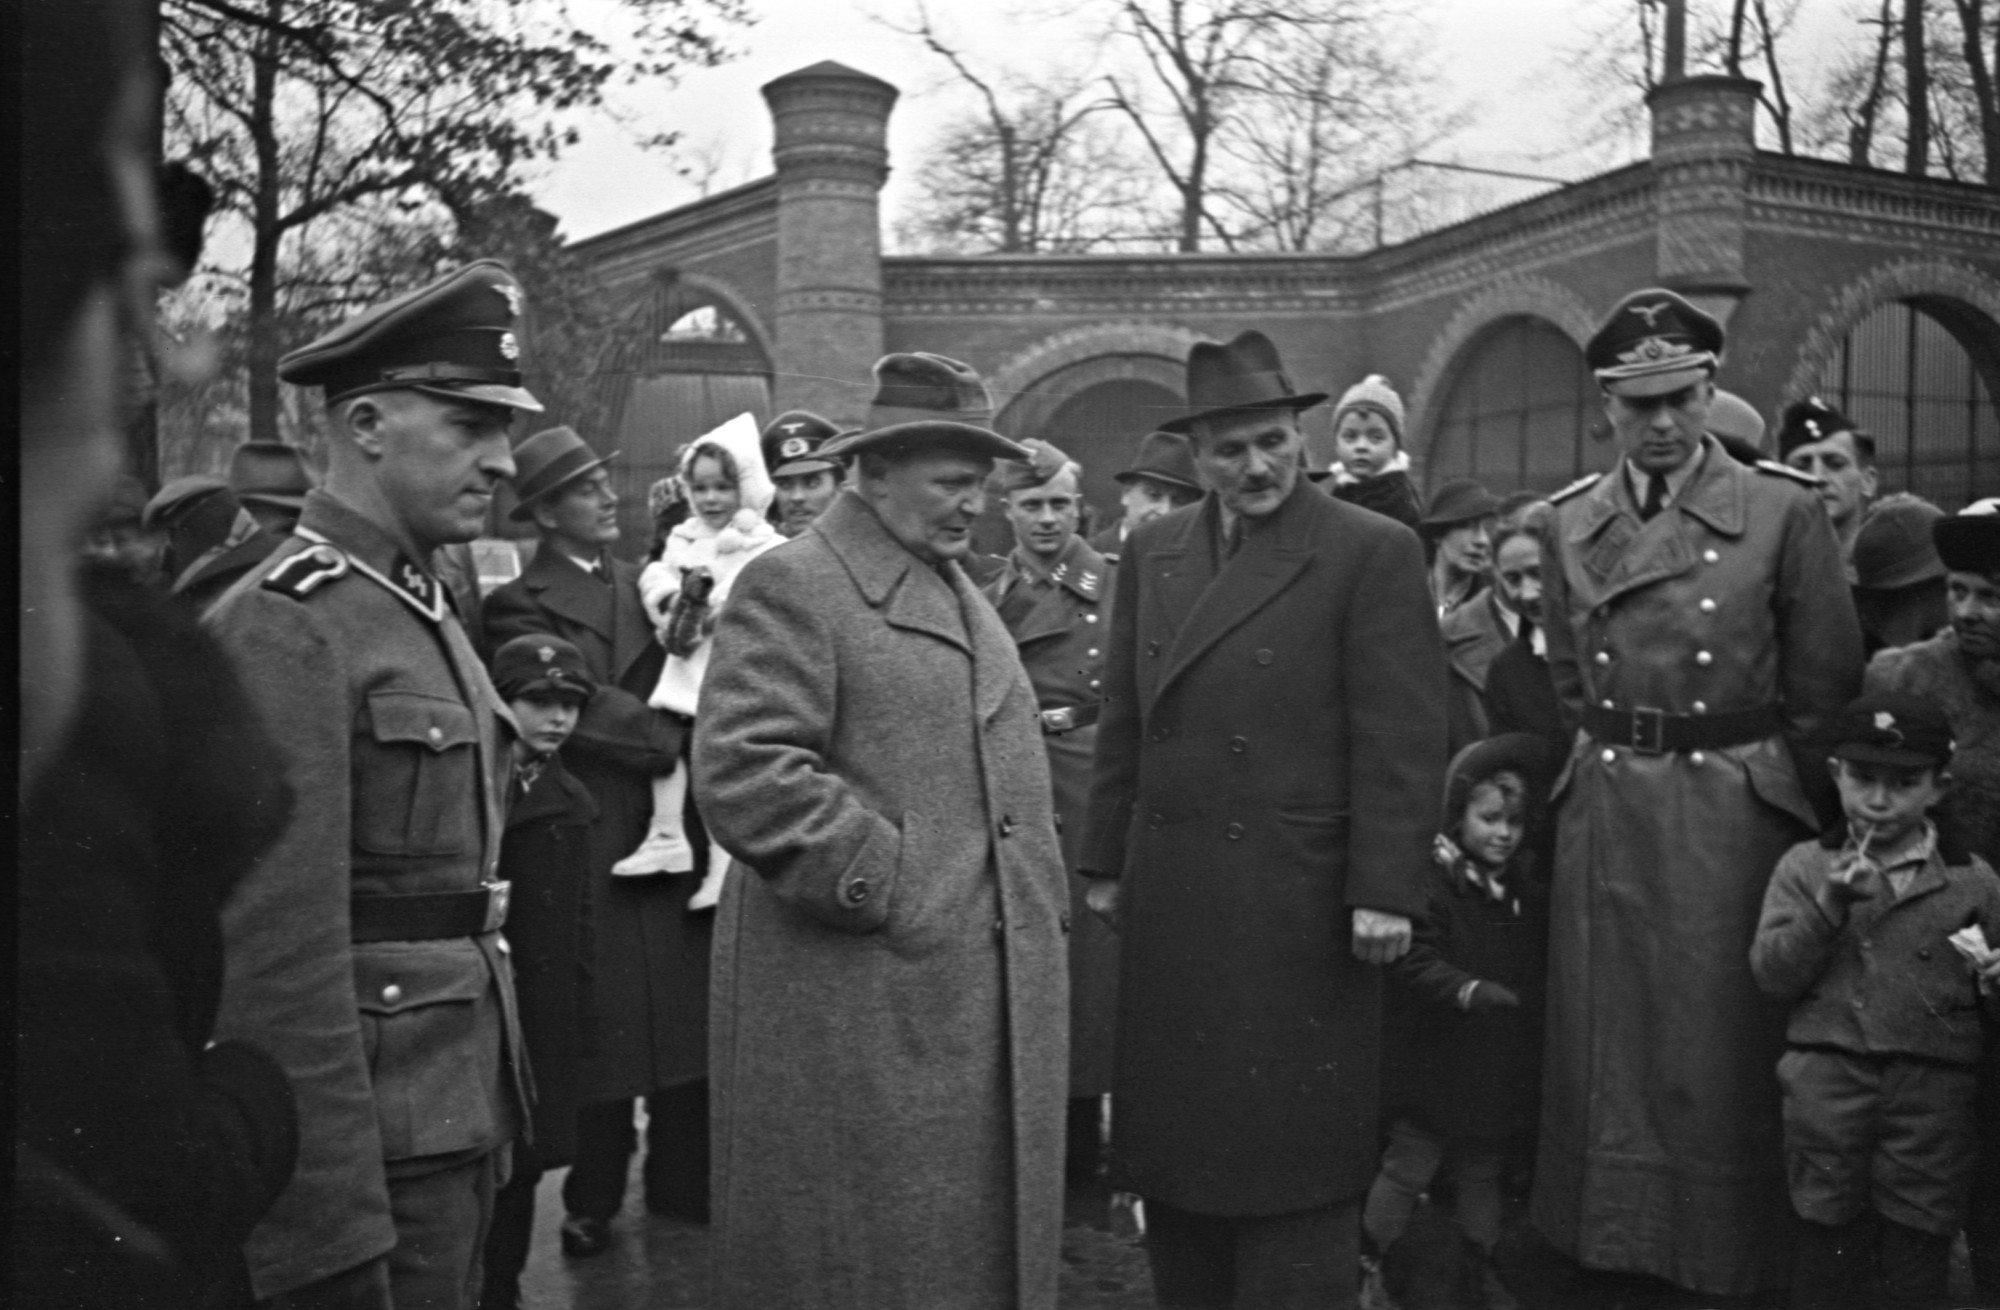 Black and white photograph: Two men in coats and hats surrounded by families with children and people in Nazi uniforms. Brick wall with window arches in the background.